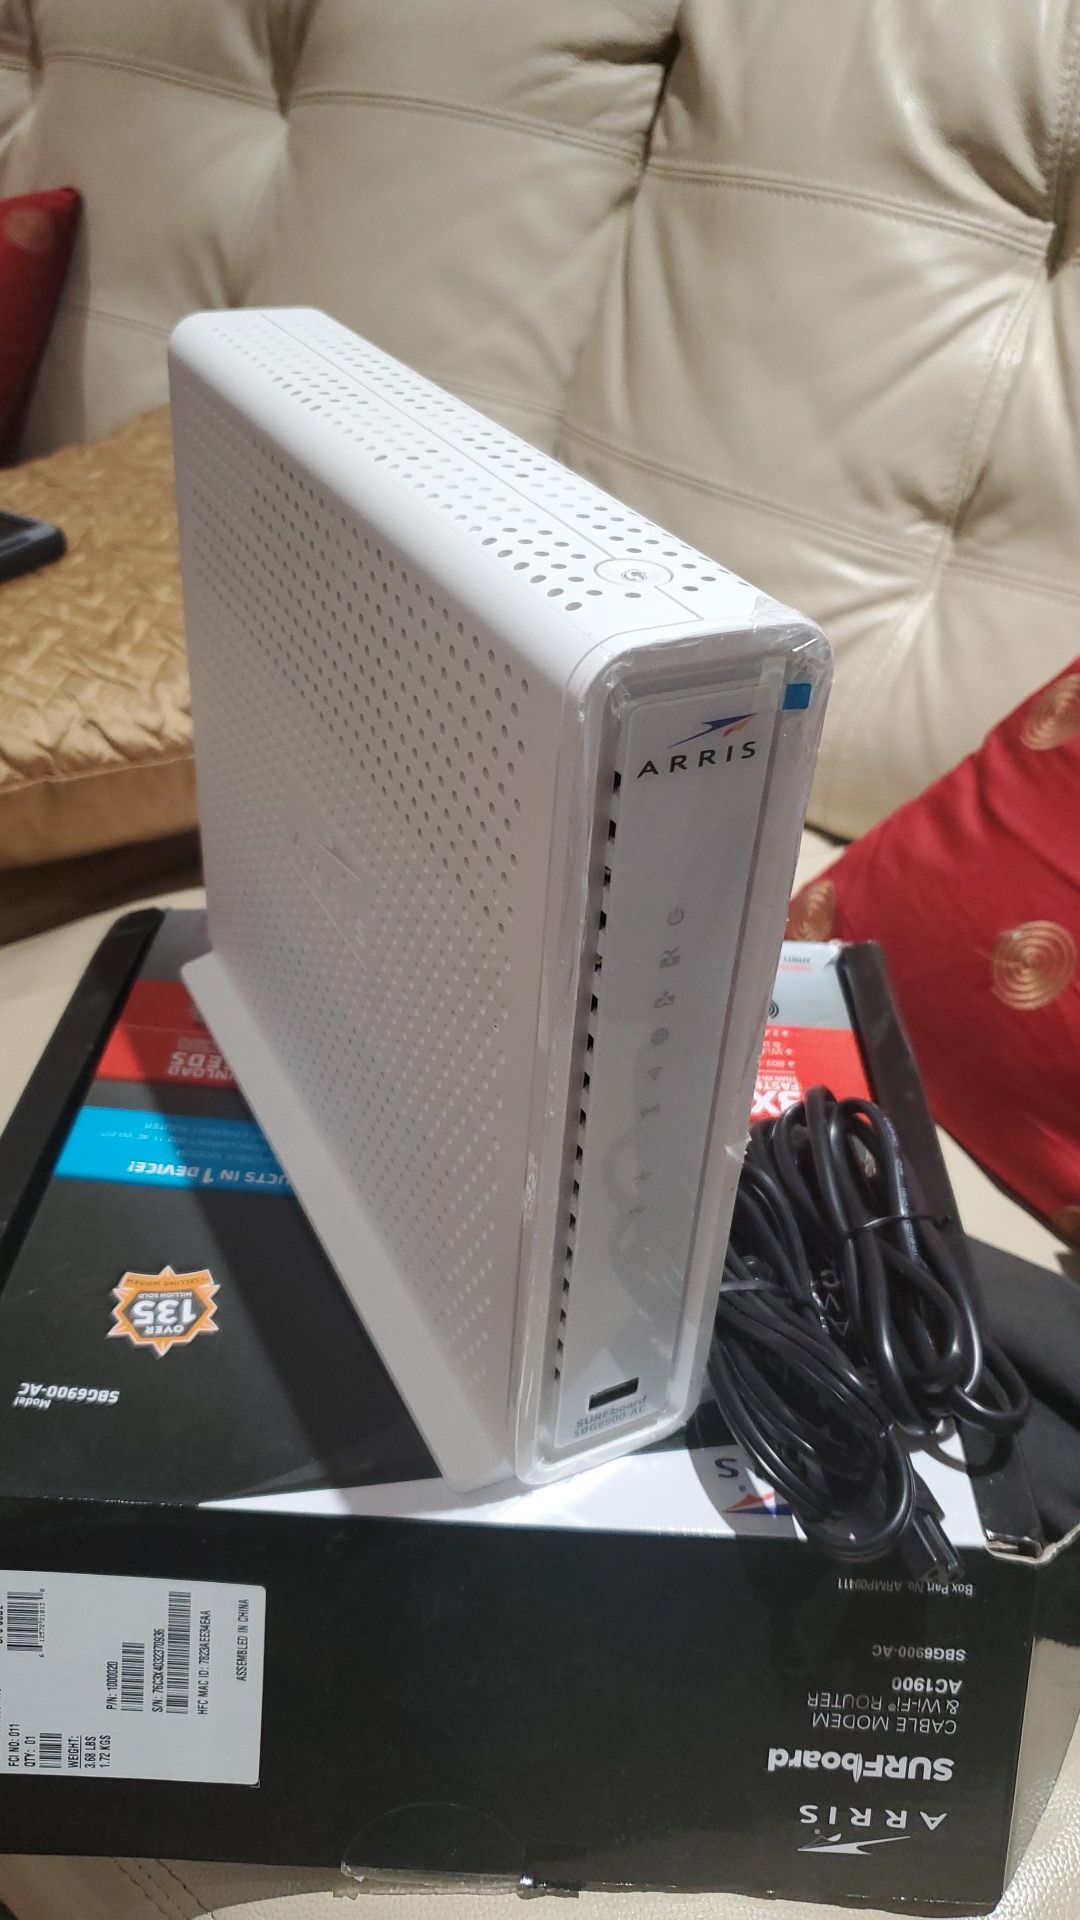 Arris surfboard cable modem wi-fi router